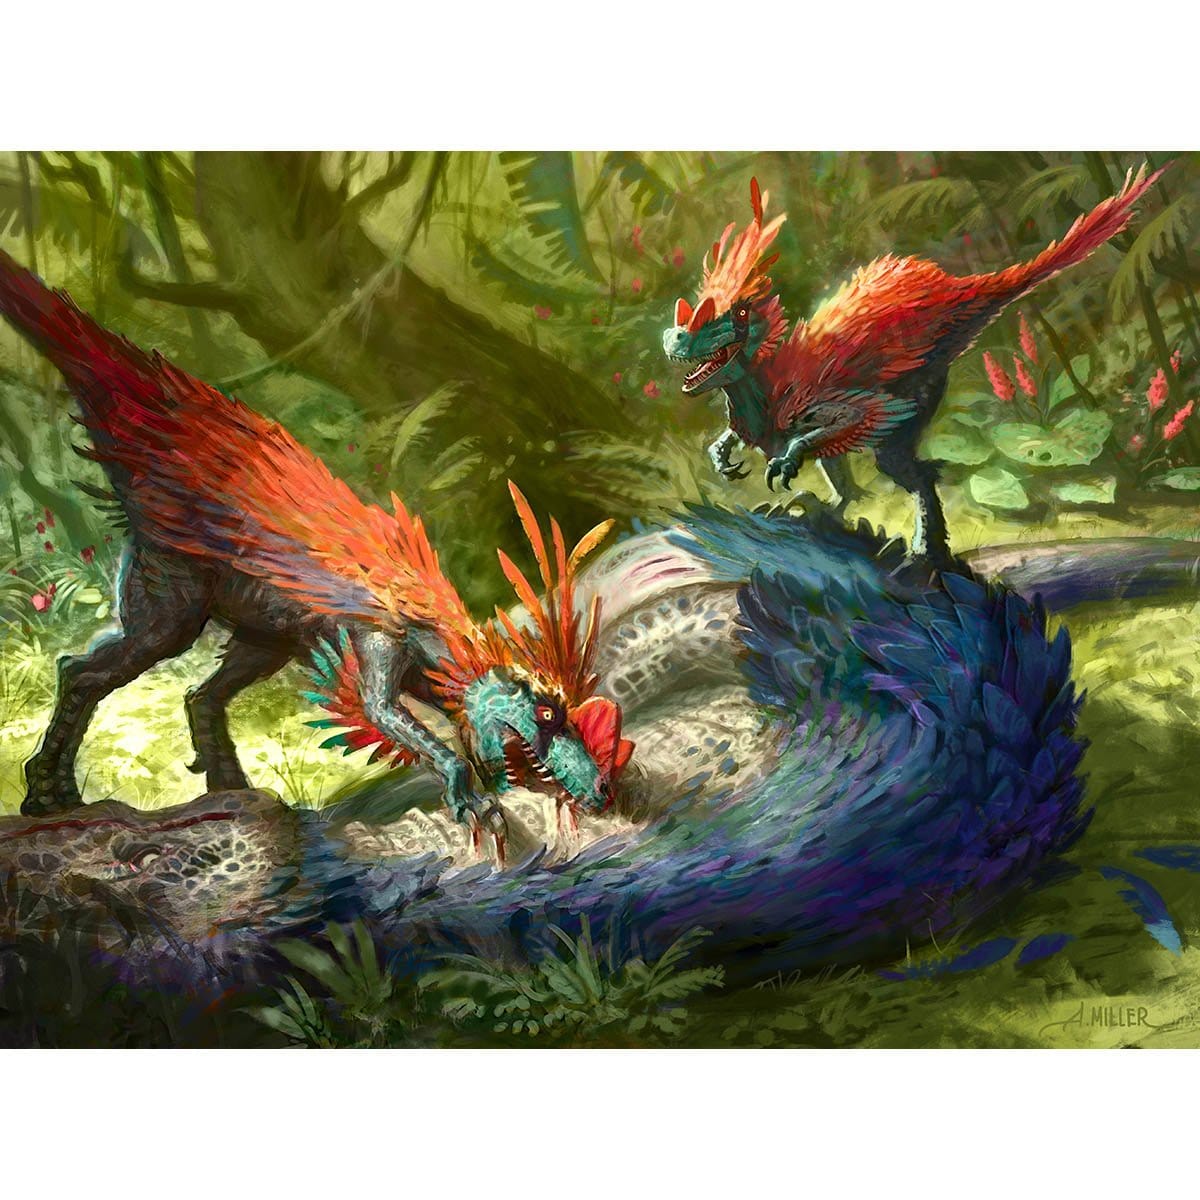 Sun-Crowned Hunters Print - Print - Original Magic Art - Accessories for Magic the Gathering and other card games